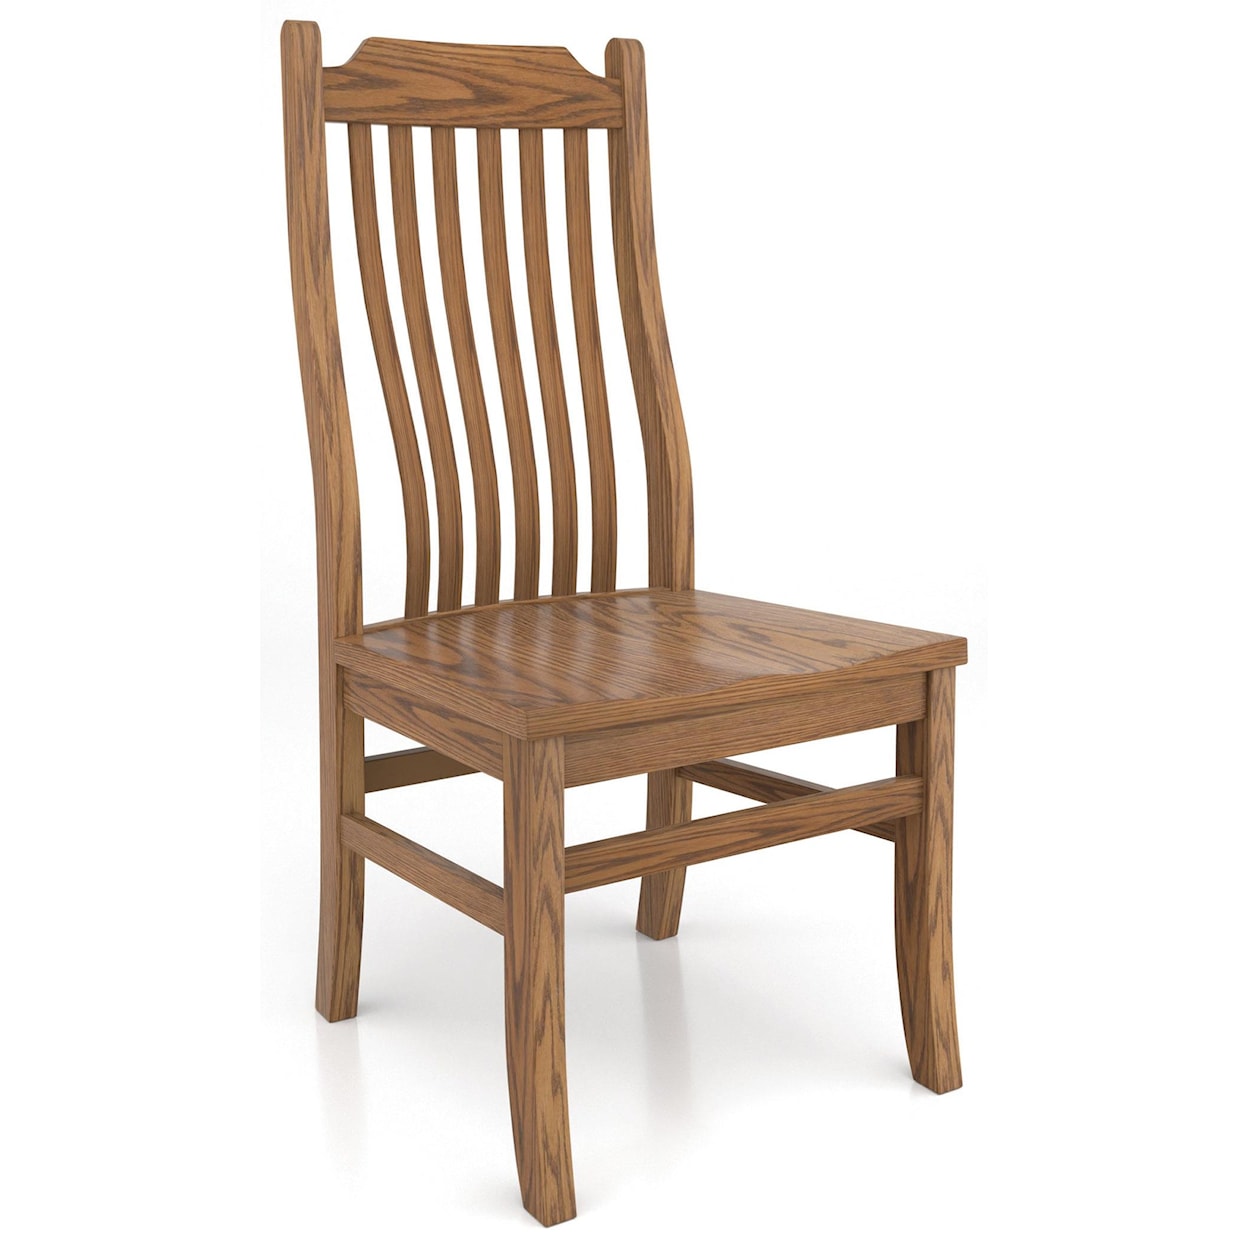 Wengerd Wood Products 46C Side Chair